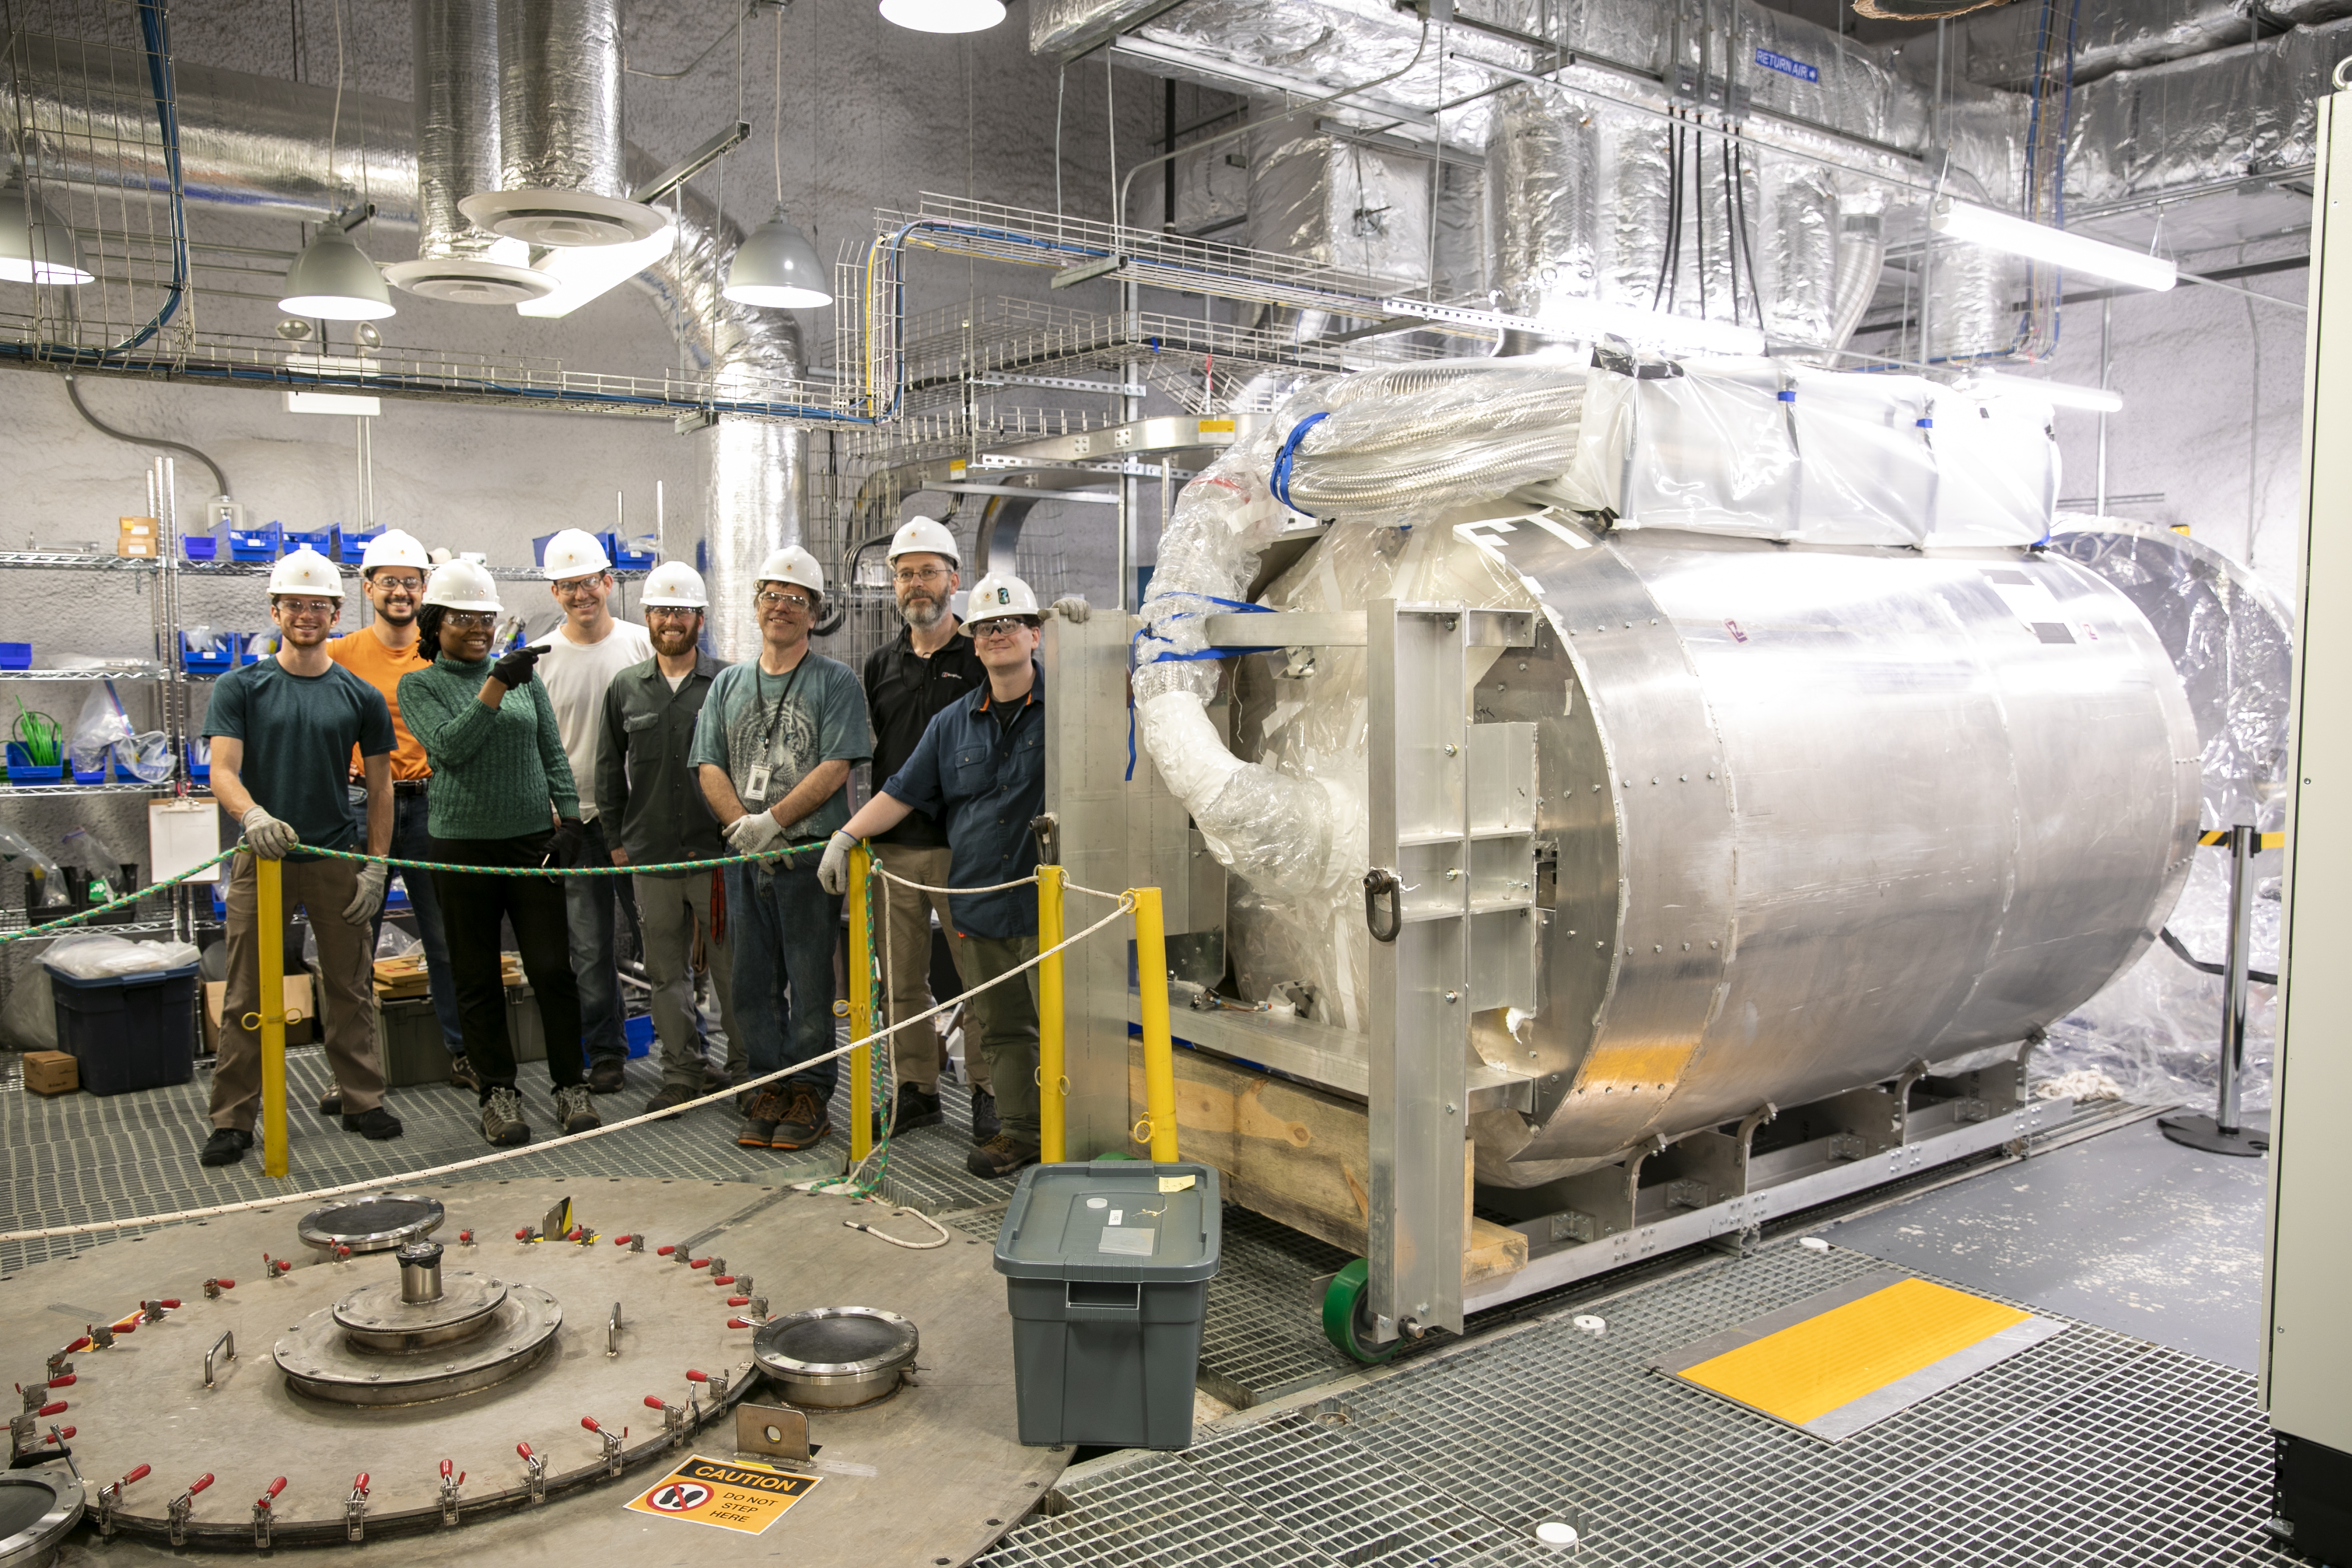 Group of workers stands beside cryostat vessel